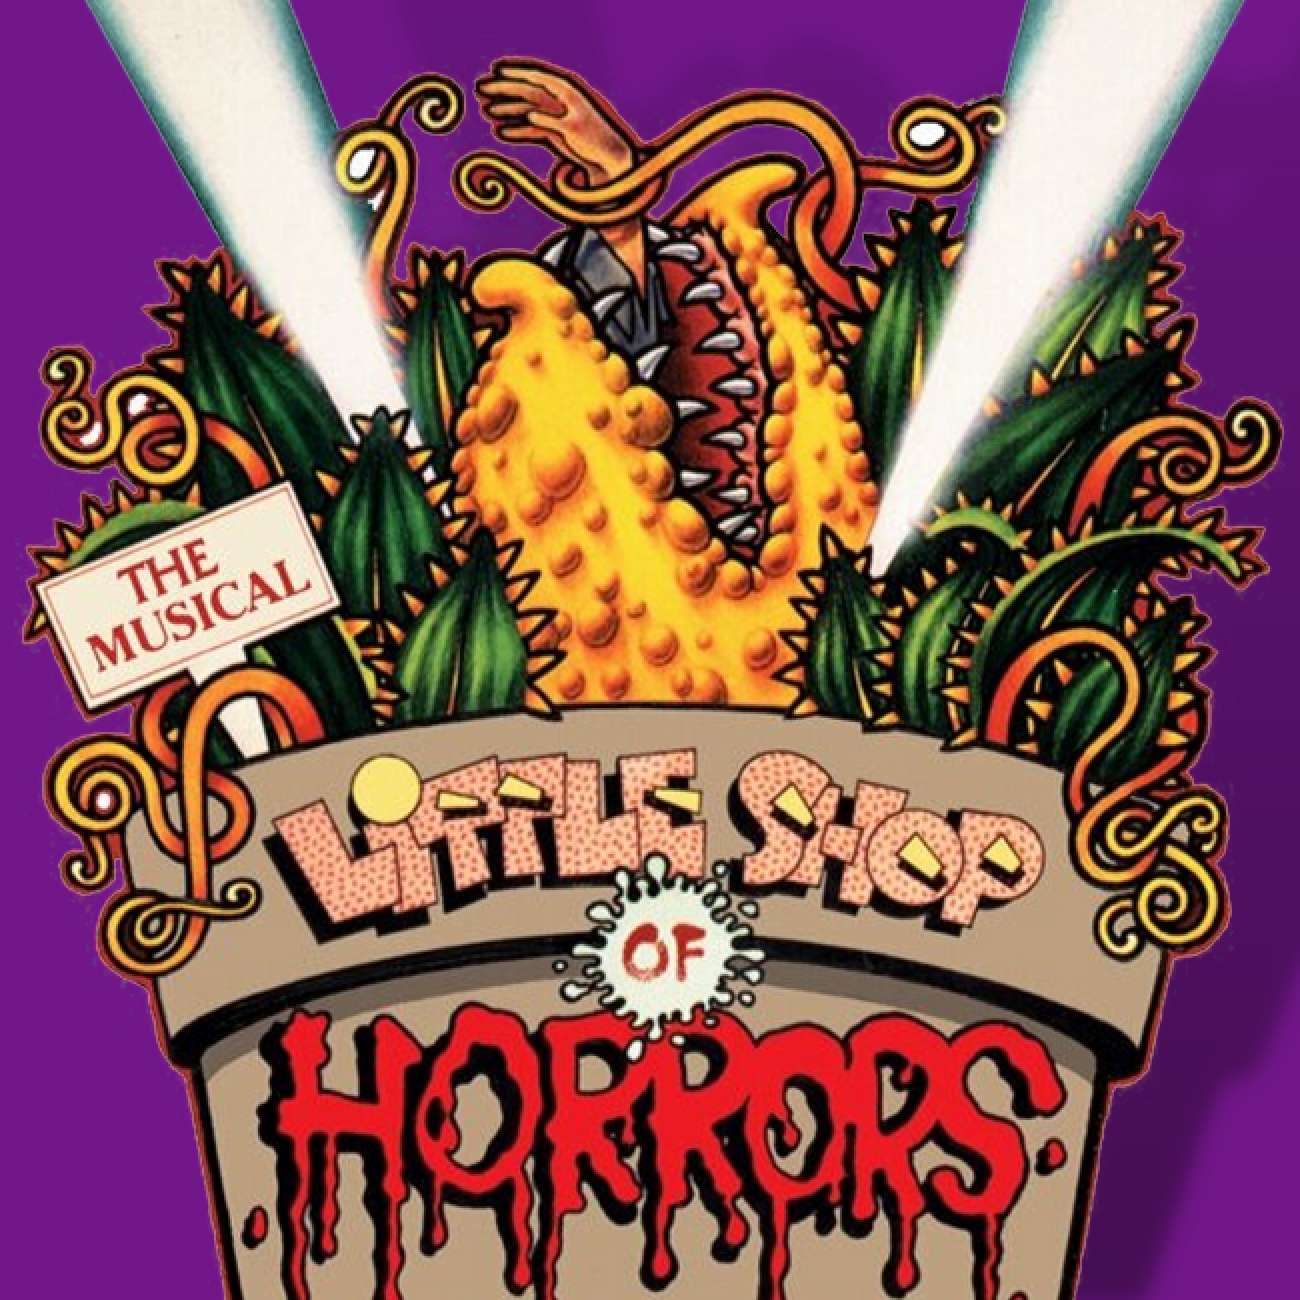 little shop of horrors poster with man eating plant